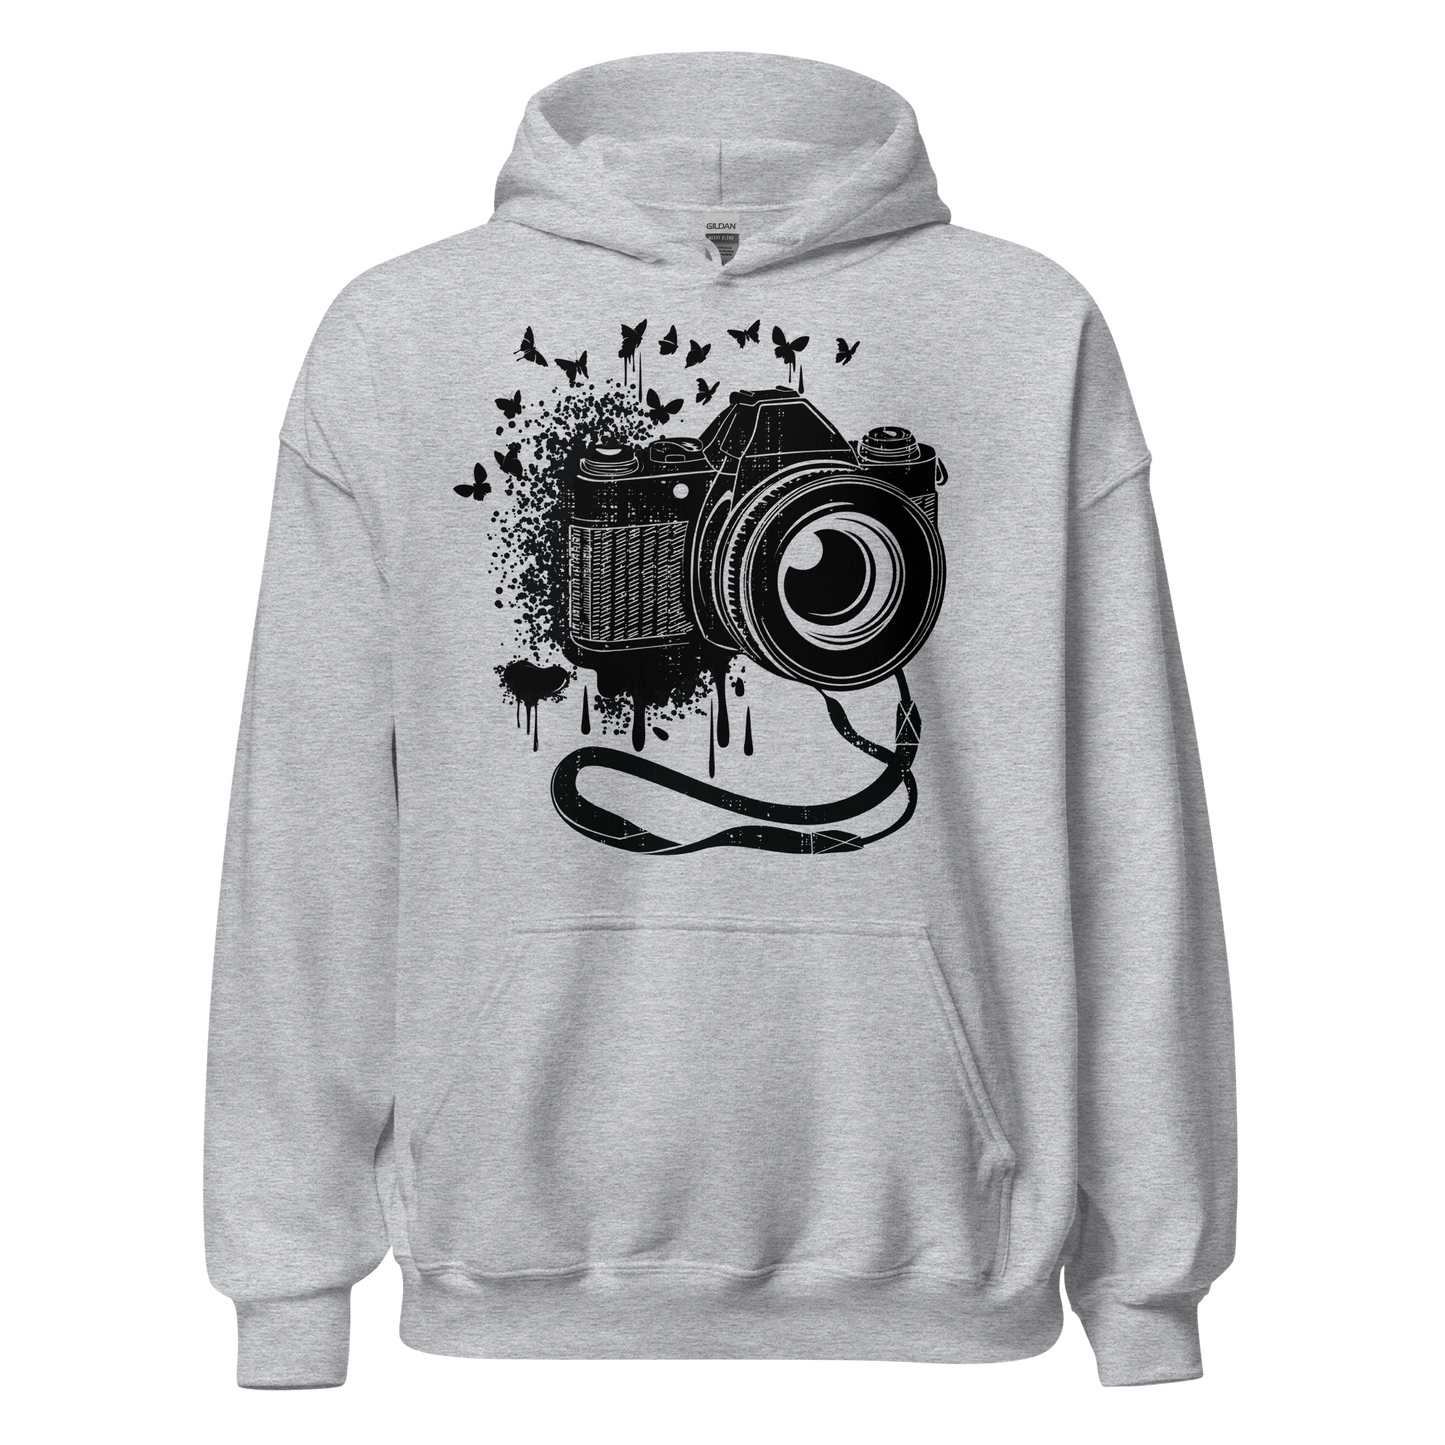 Retro Unisex Hoodie - Vintage Camera and Butterflies Ghost Front